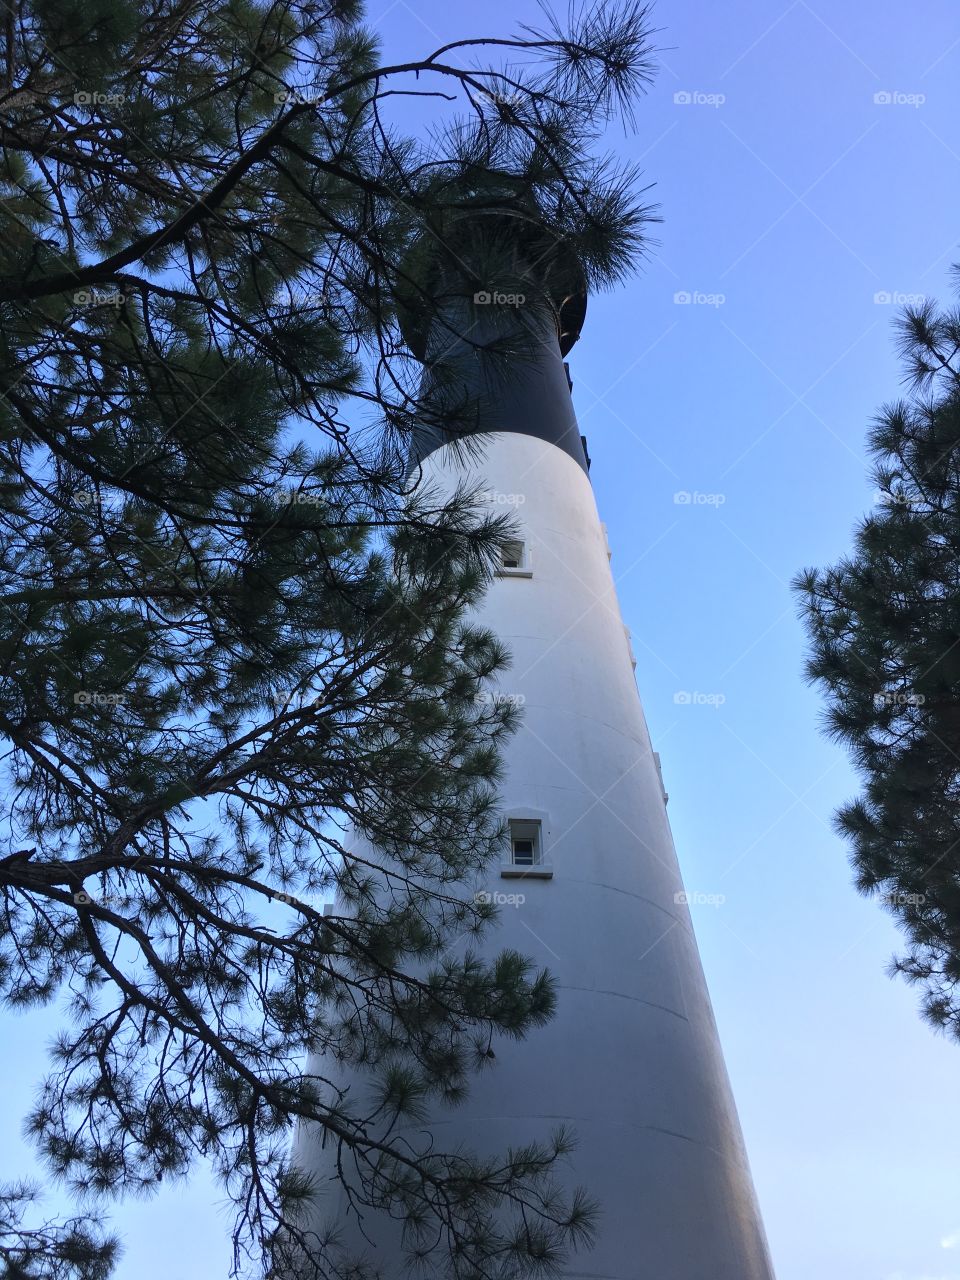 Vacation to South Carolina. Went site seeing and found this beautiful lighthouse and some strange looking sky views.